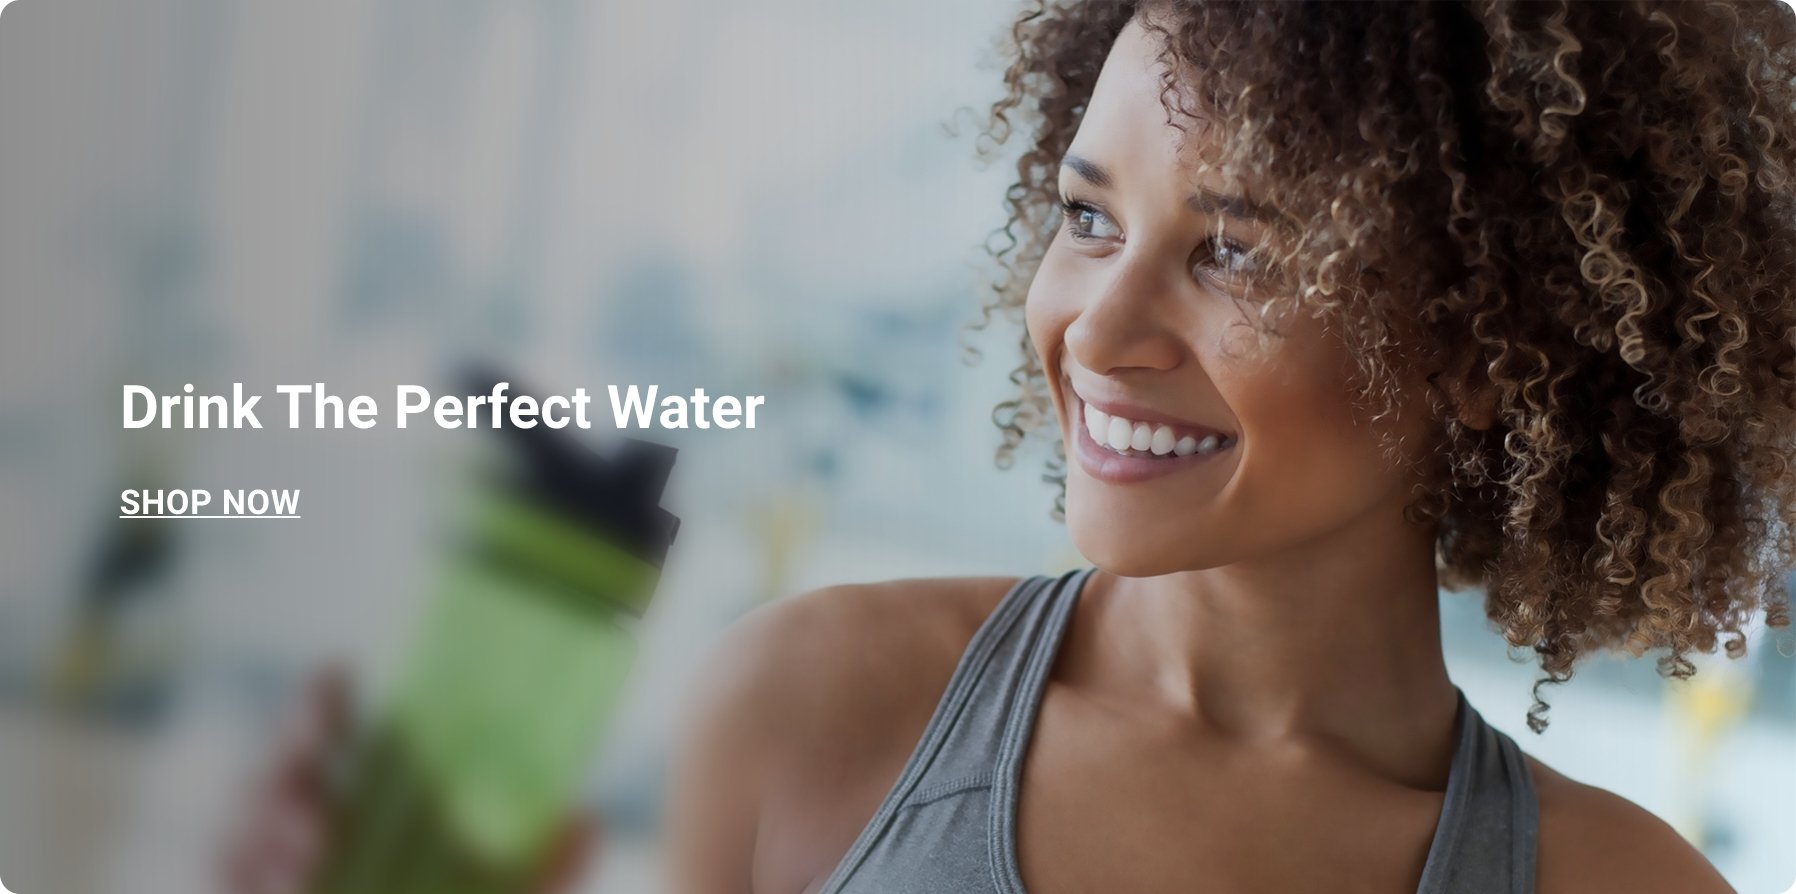 Drink The Perfect Water